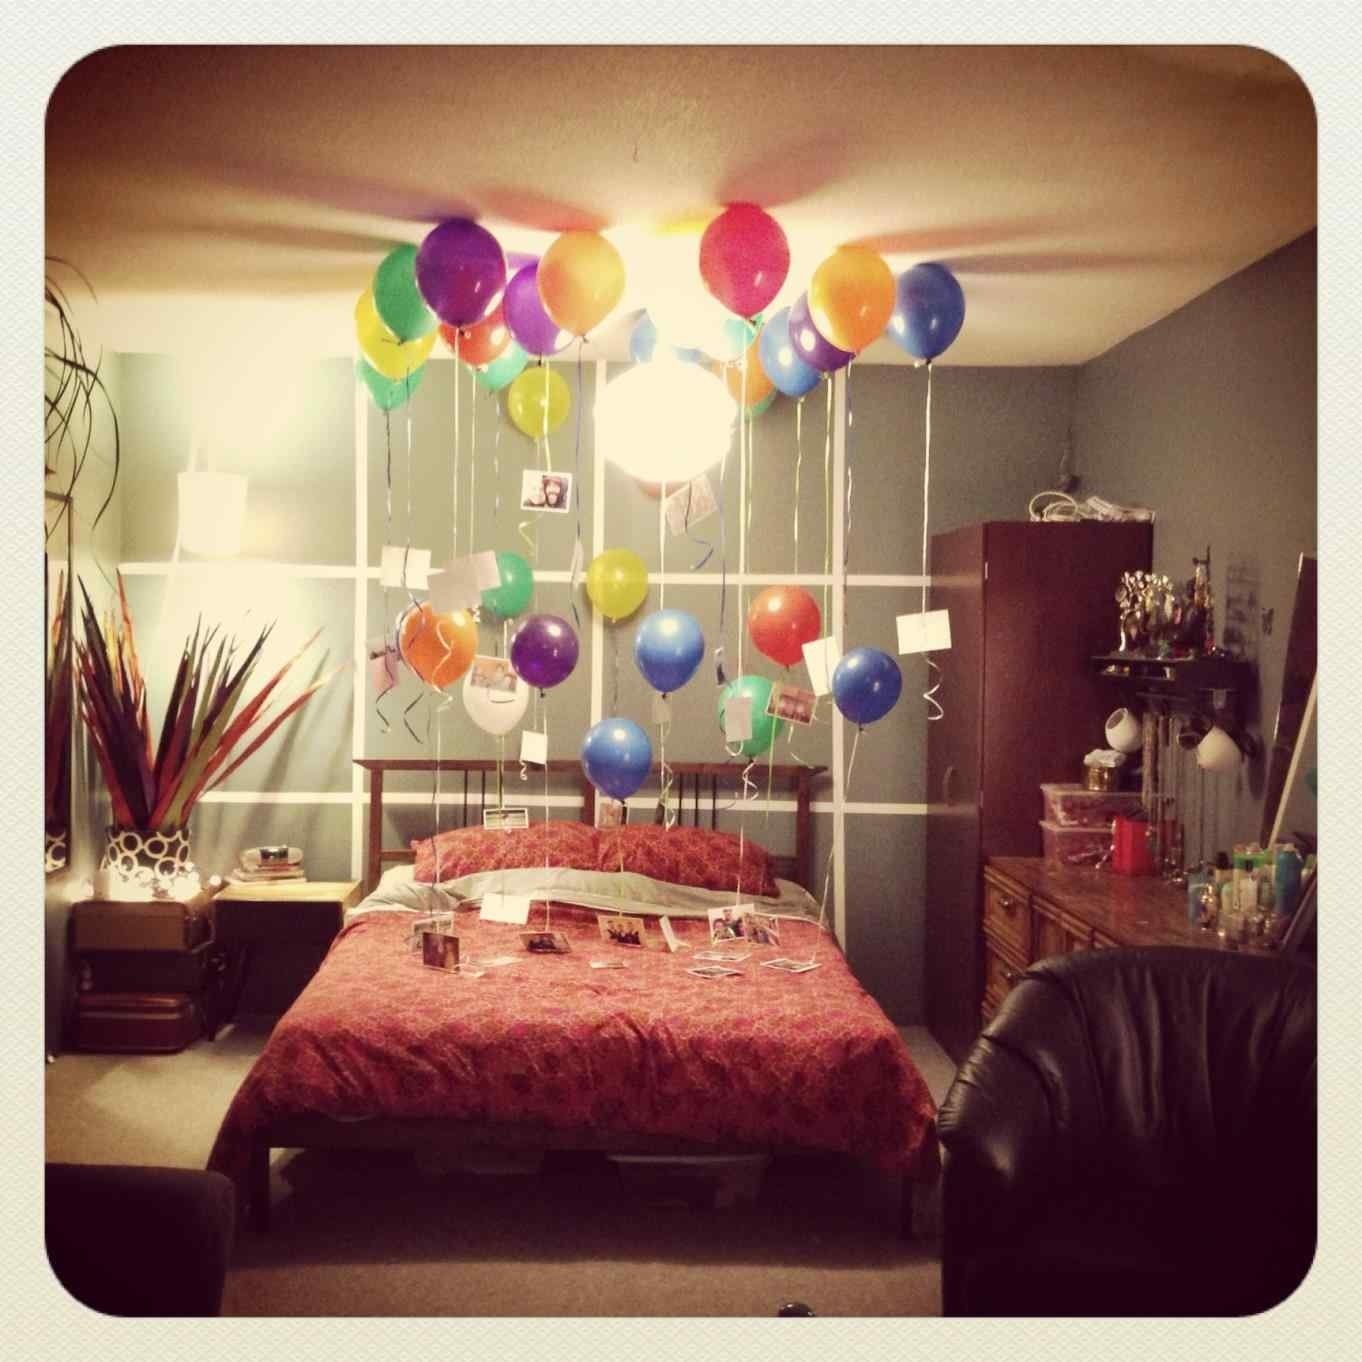 10 Most Popular Romantic Ideas For His Birthday ideas for him romantic romantic ideas for him at home on his 2022